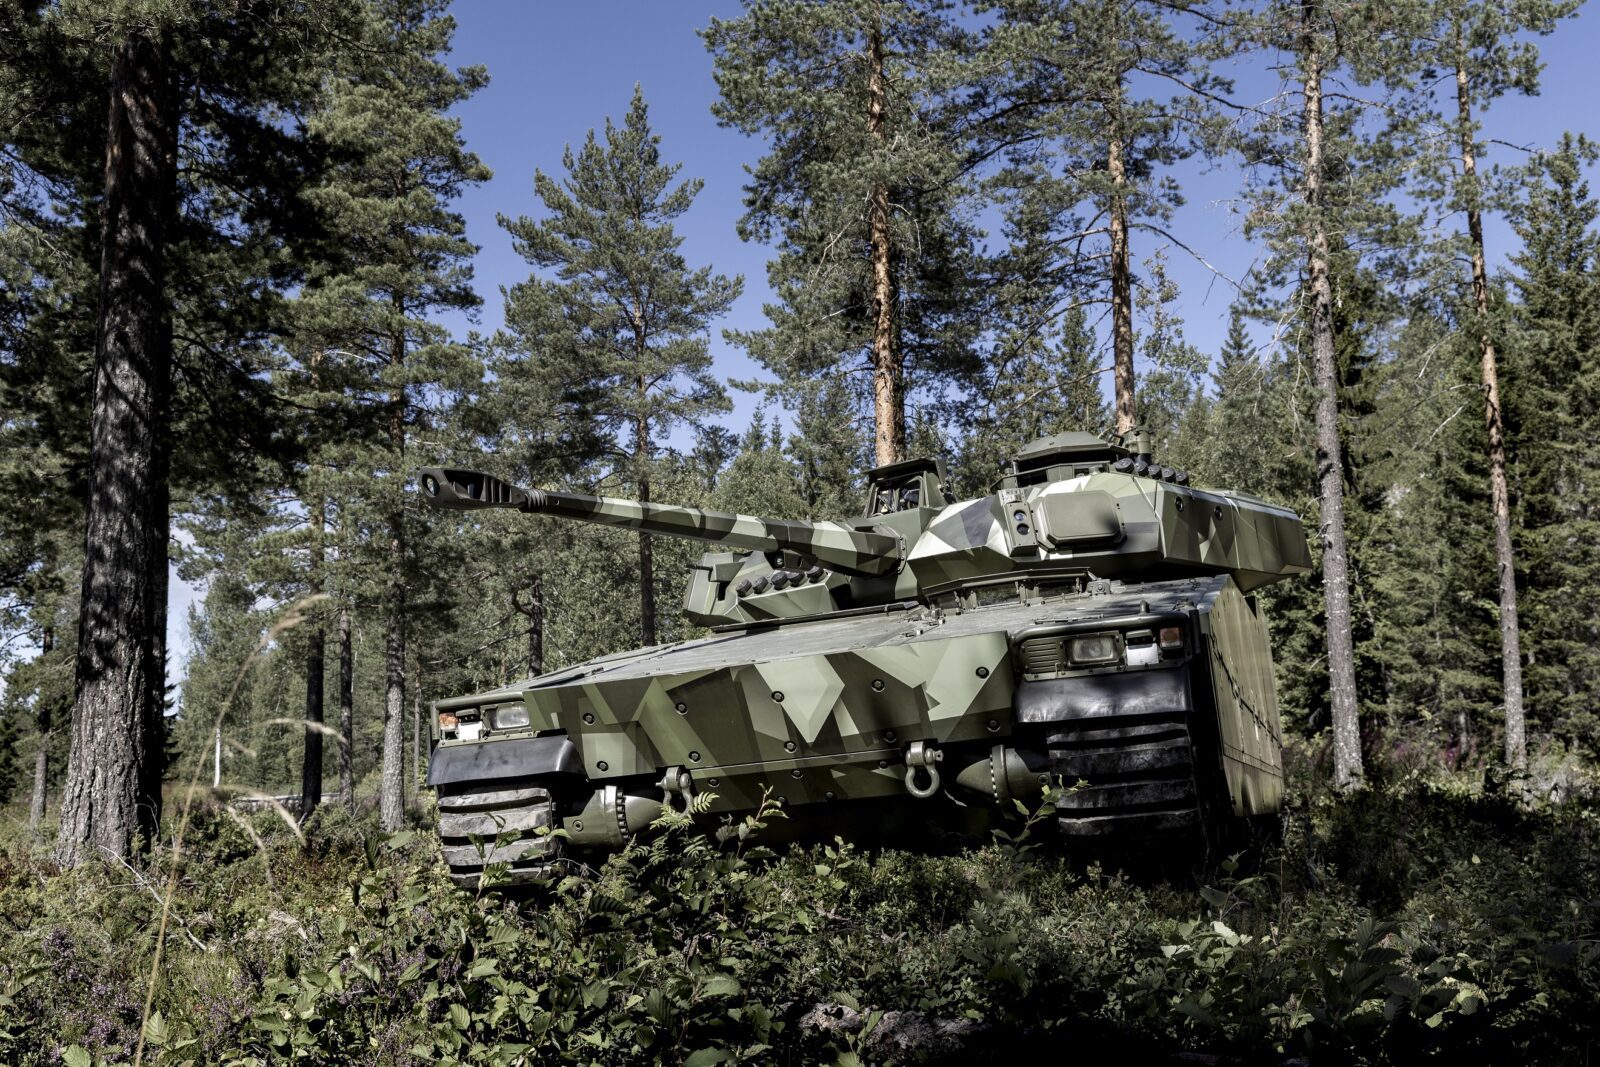 Czech Republic acquires 246 CV90 MkIV infantry fighting vehicles in $2.2 billion deal with BAE Systems Hägglunds